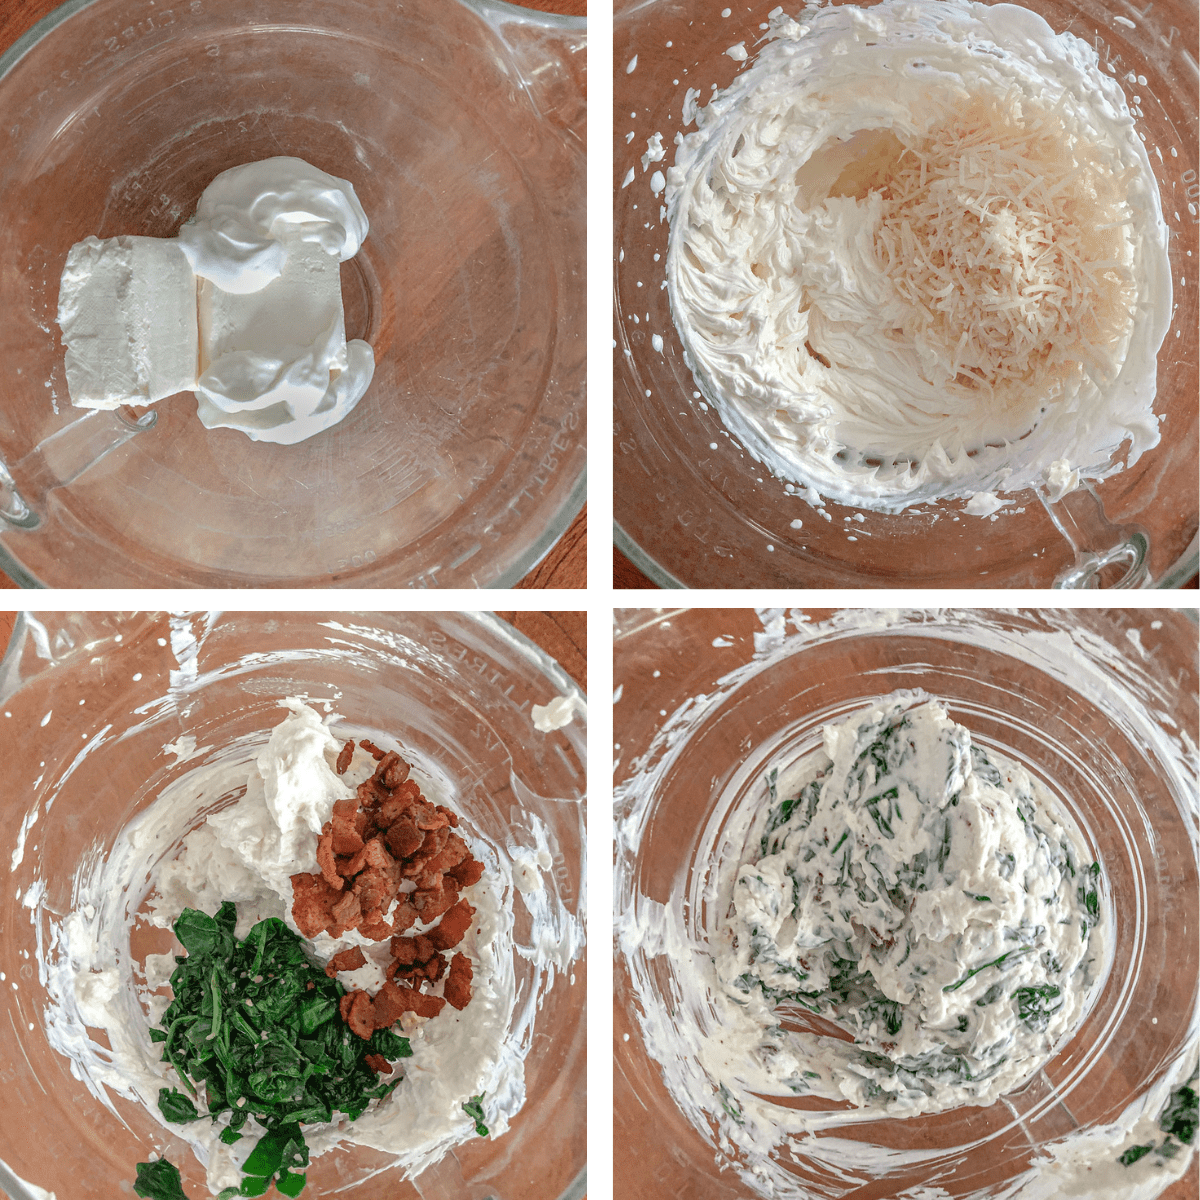 Mixing cheese, sour cream, yogurt, parmesan cheese, spinach, and bacon.